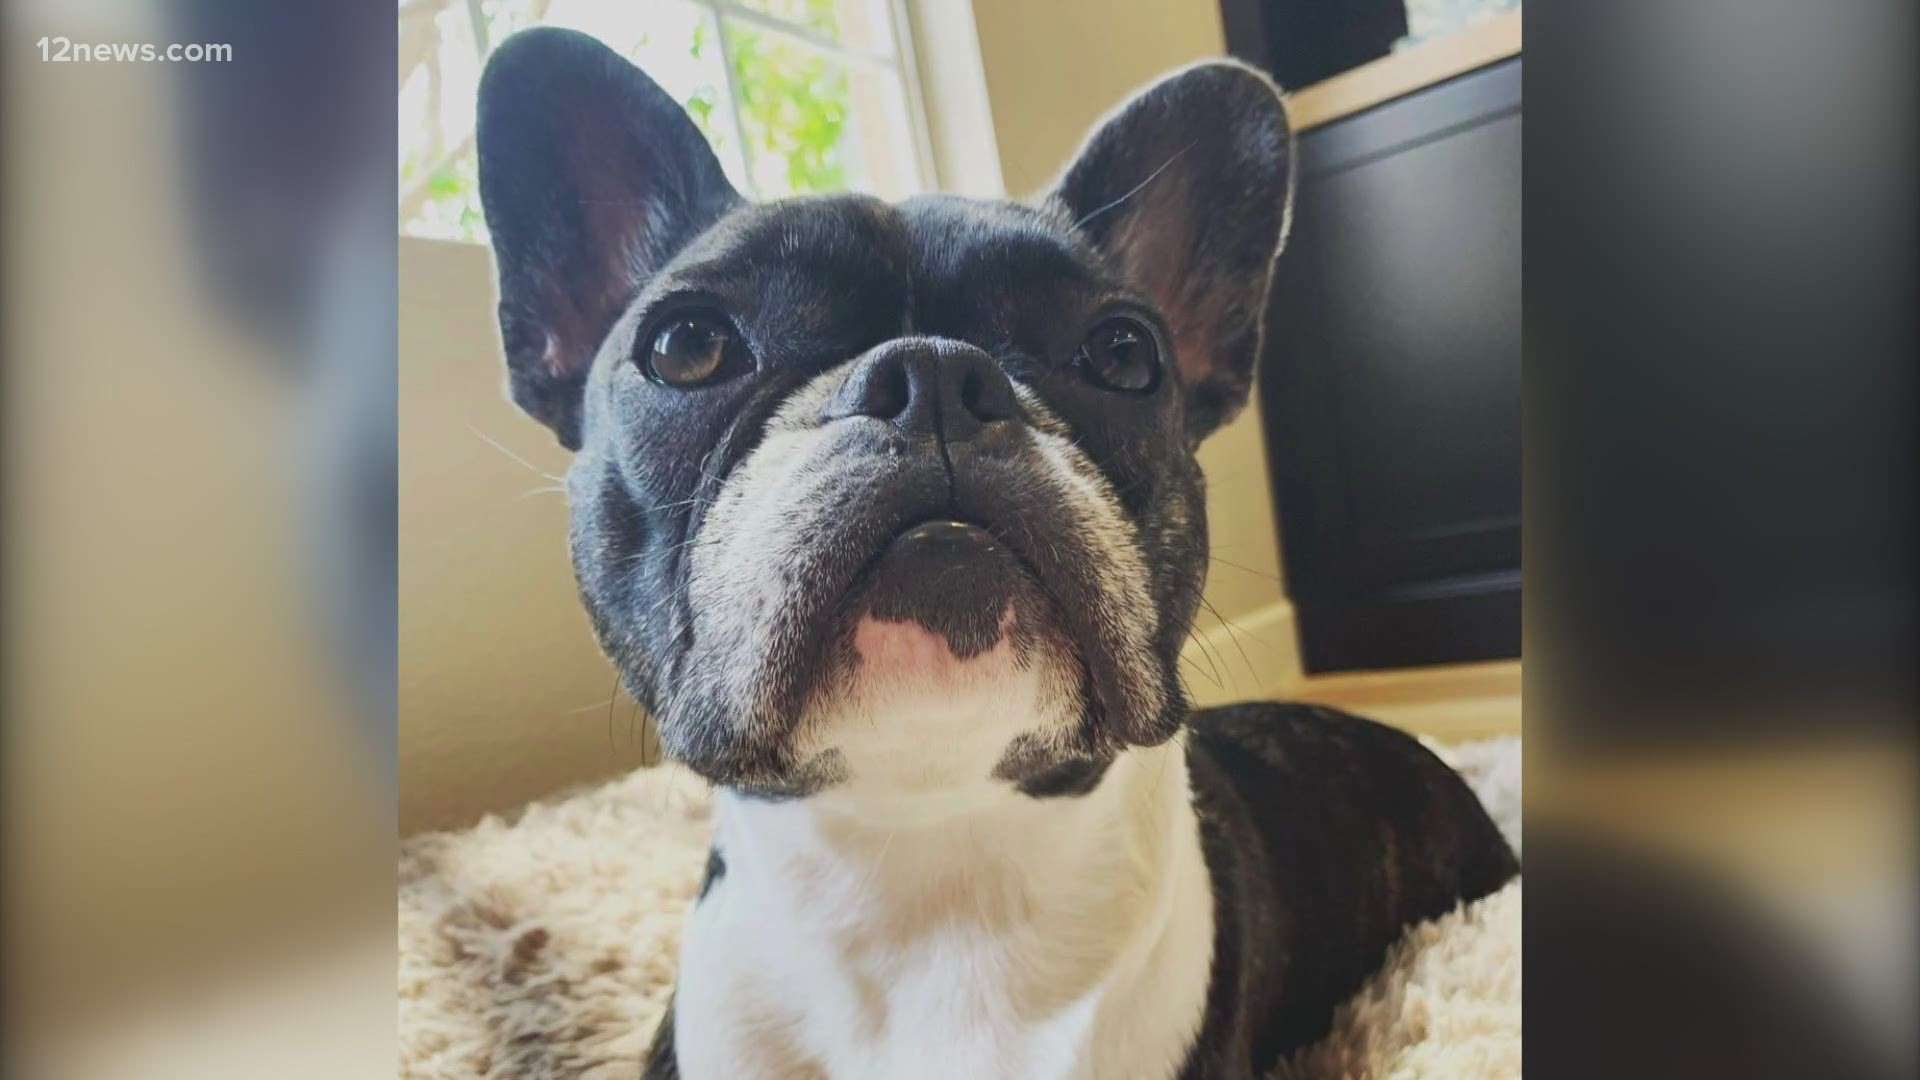 A Chandler family is still searching after their French bulldog got out. She's been missing for almost two months. They know Lilly is out there but don't know where.